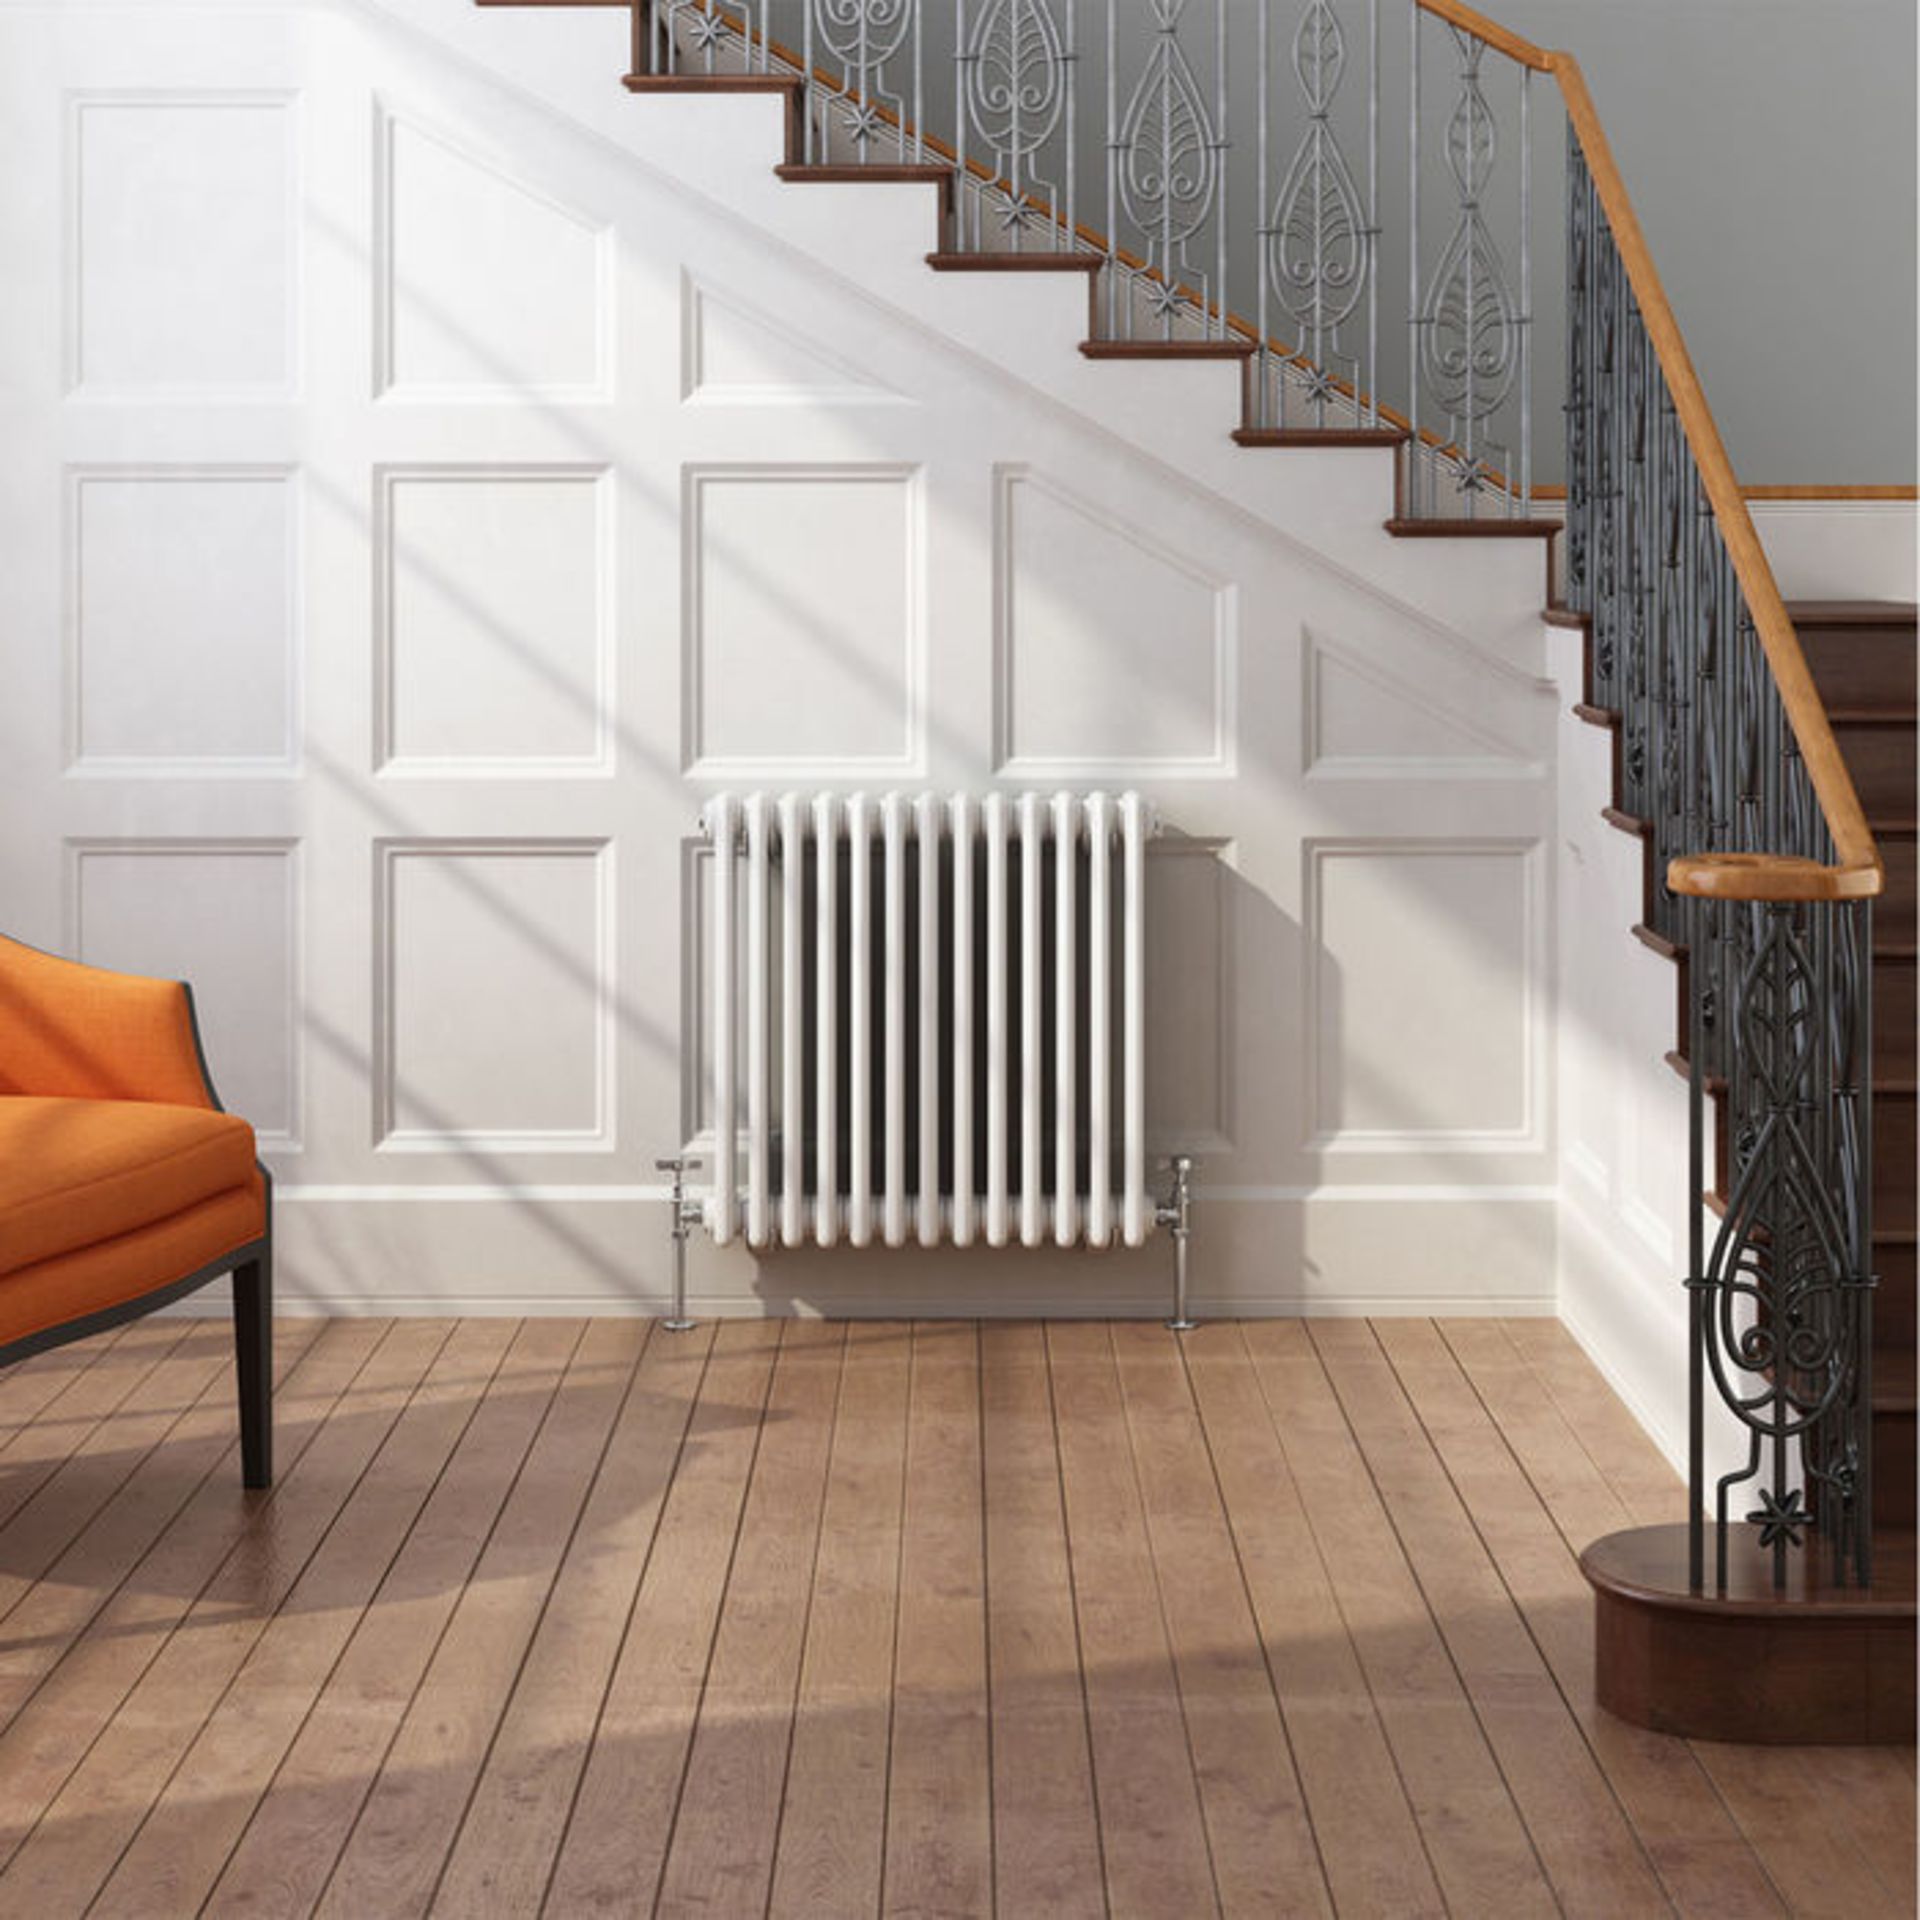 NEW & BOXED (E100) 600x628mm White Double Panel Horizontal Colosseum Traditional Radiator. RR... - Image 2 of 4